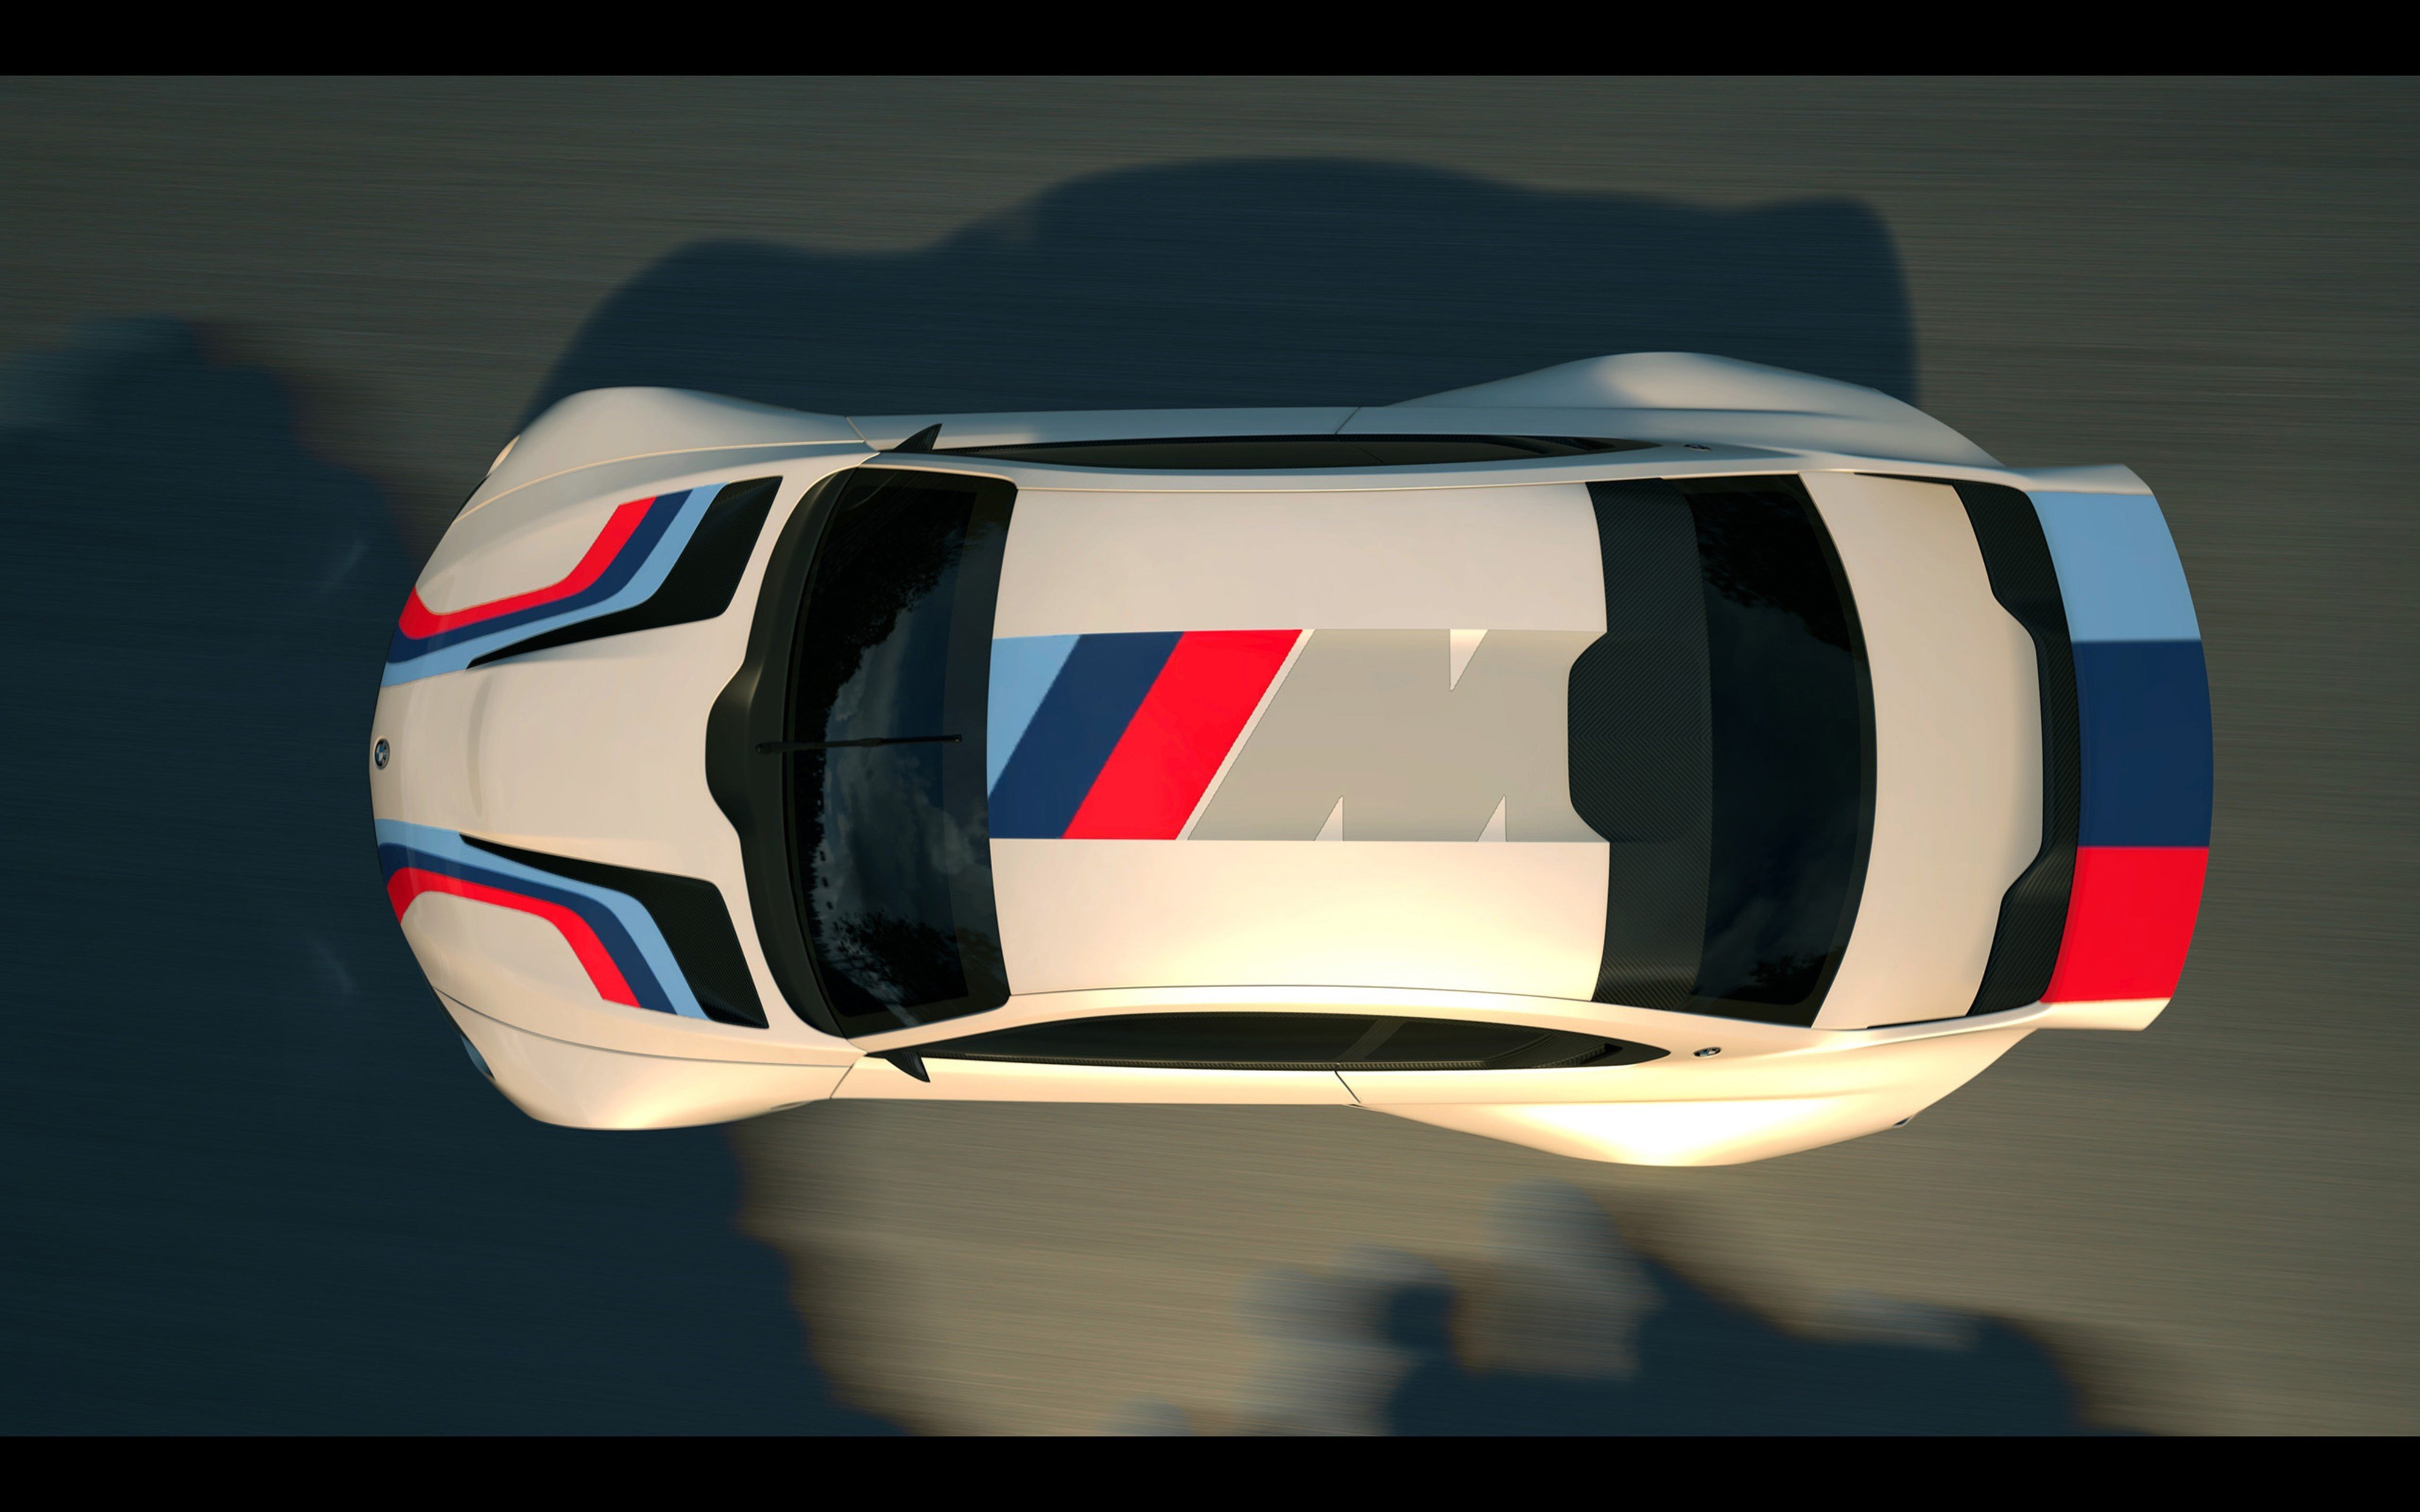 2014, Bmw, Vision, Gran turismo, Concept, Race, Car, Game, Vehicle, Racing, Germany, 4000x2500 Wallpaper